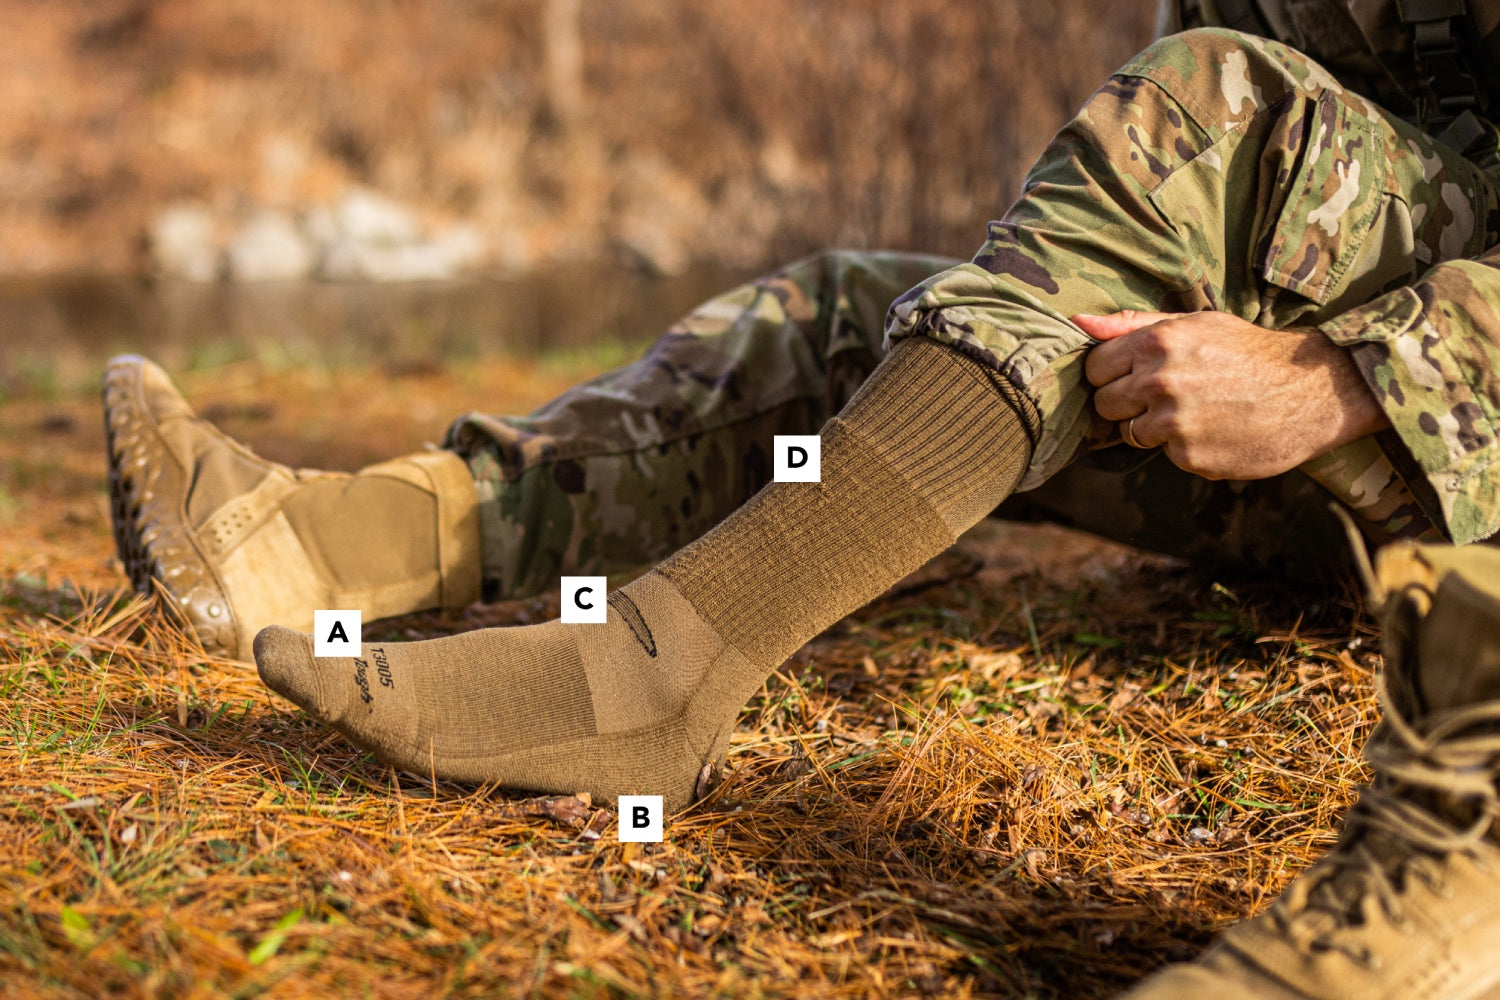 Best Socks for Military Boots & Combat Boots – Darn Tough